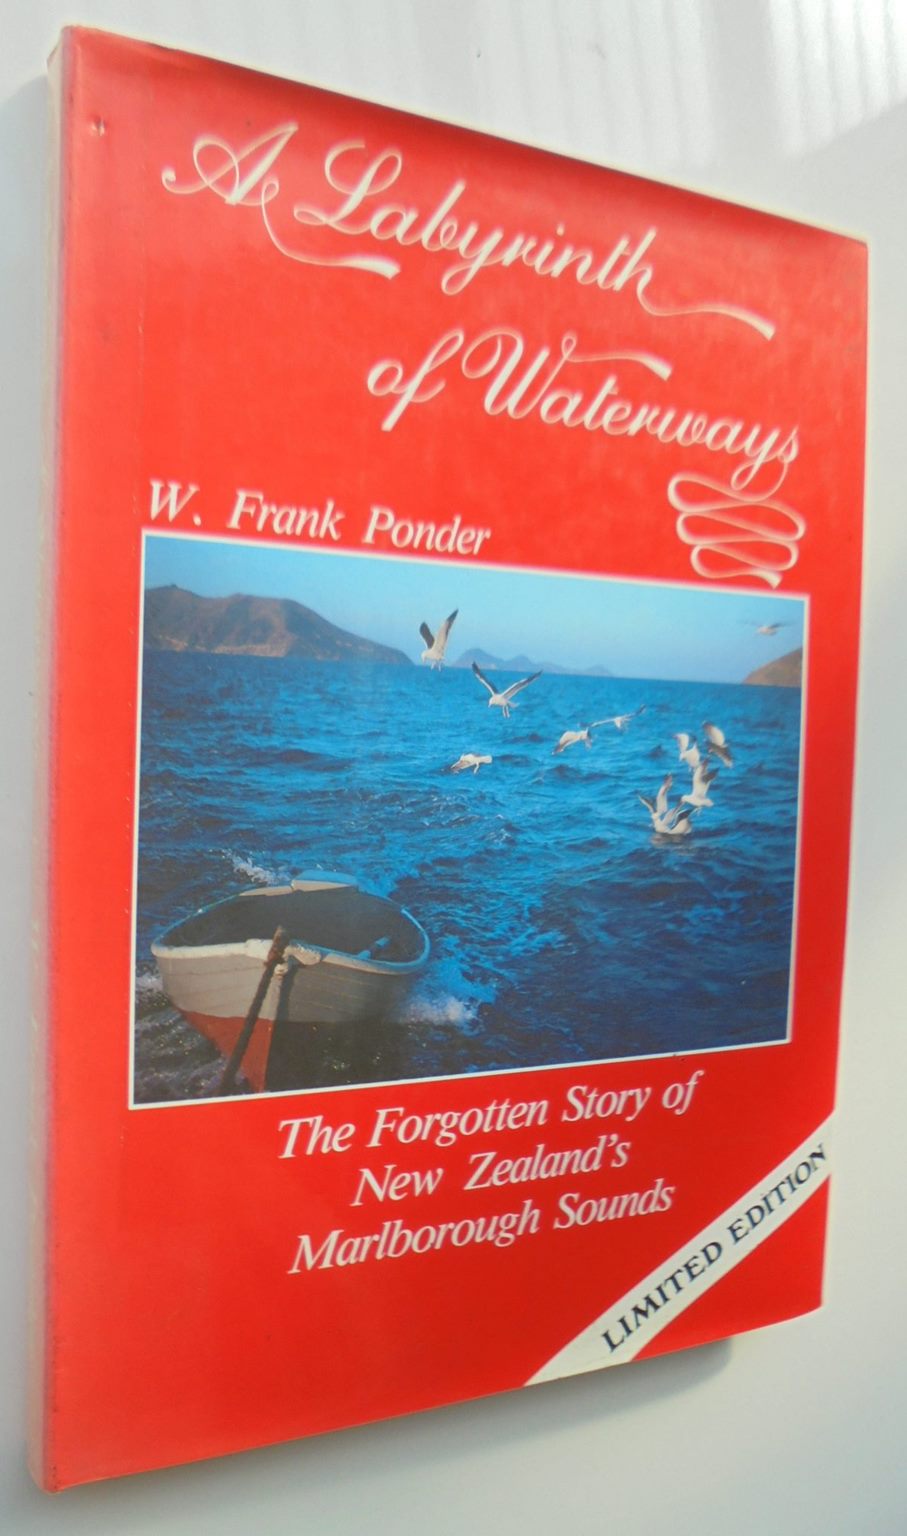 A Labyrinth of Waterways. The Forgotten Story of New Zealand's Marlborough Sounds. by W. Frank Ponder. SIGNED BY AUTHOR.